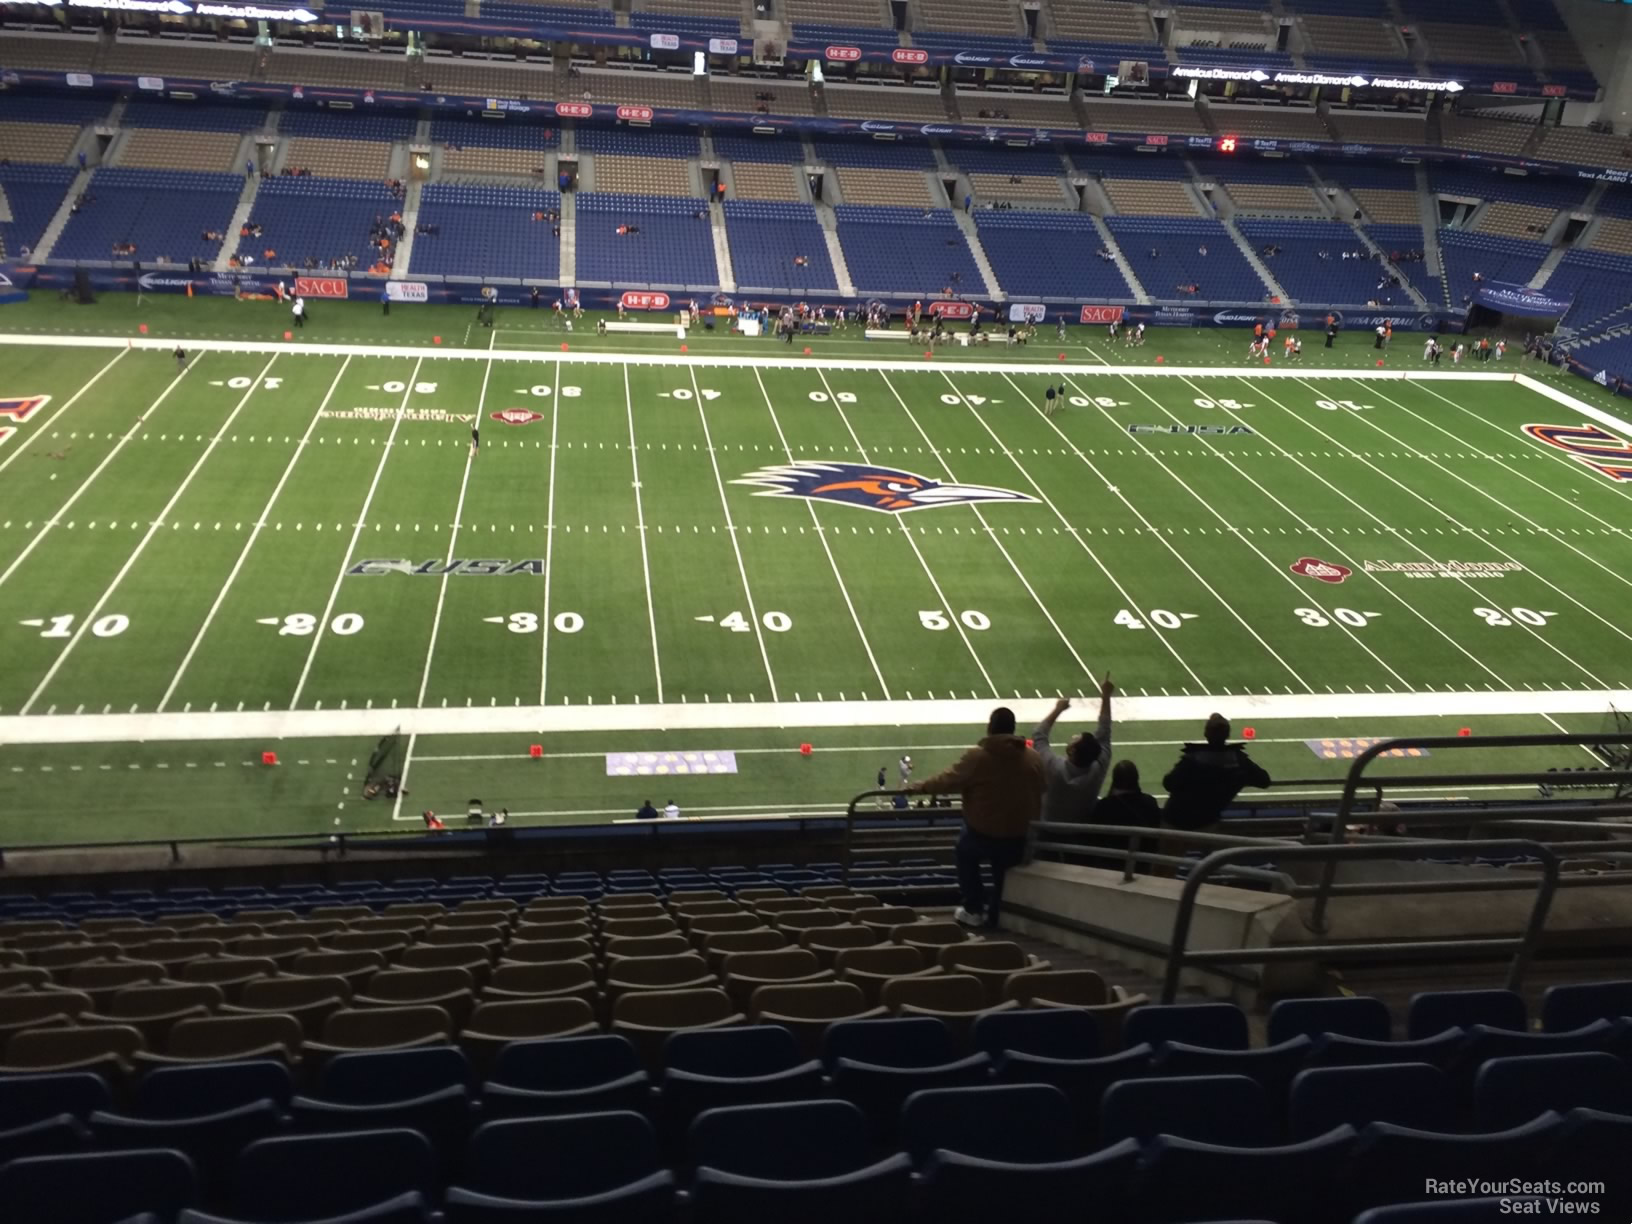 section 314, row 15 seat view  for football - alamodome